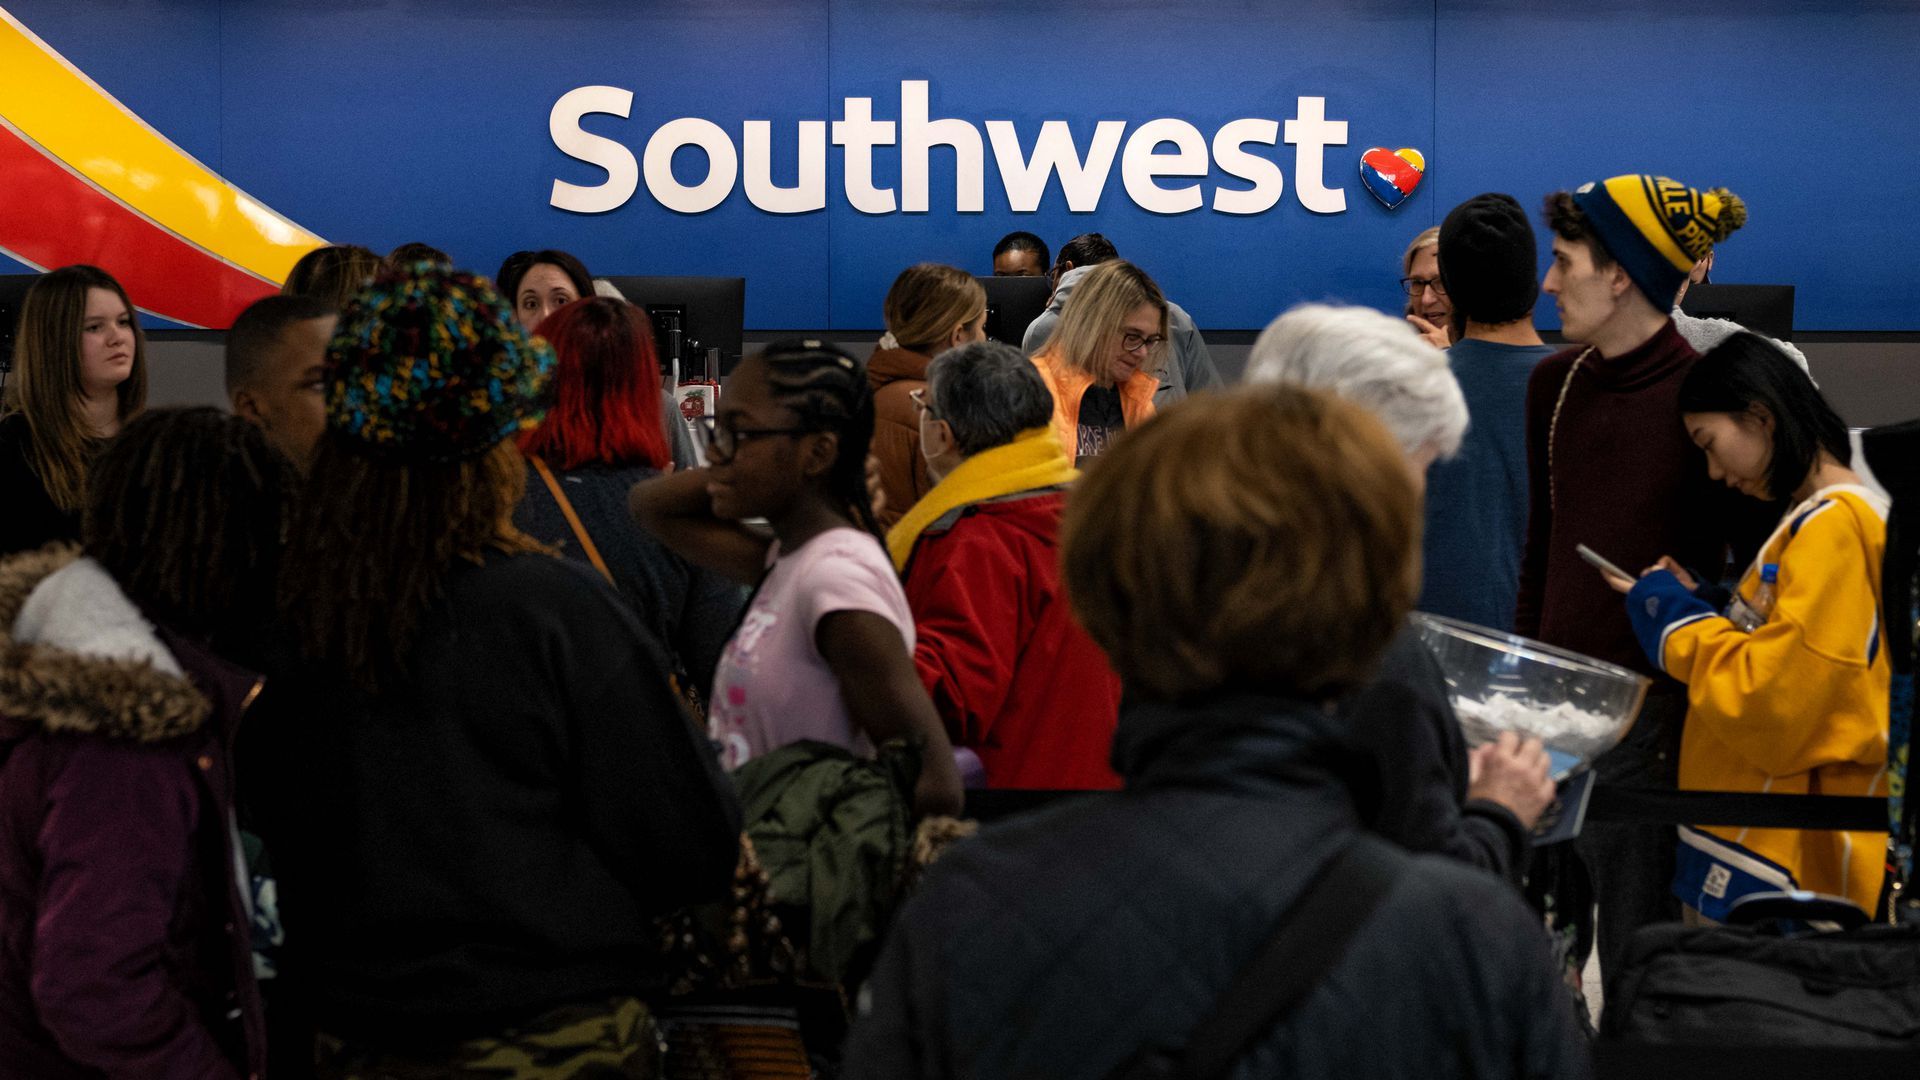 A swarm of travelers at a Southwest check-in counter.